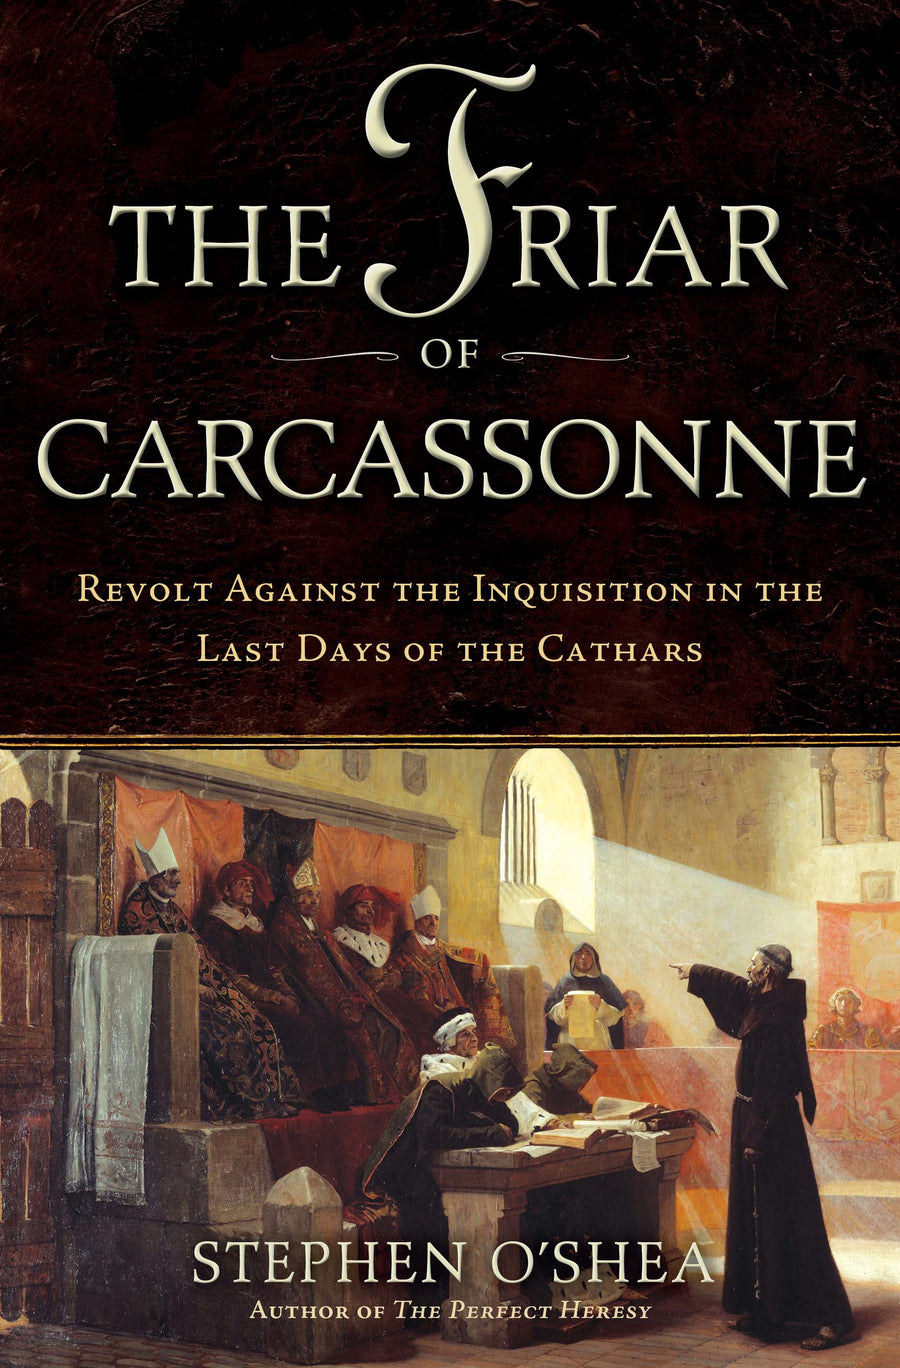 The Friar of Carcassonne : Revolt Against the Inquisition in the Last Days of the Cathars